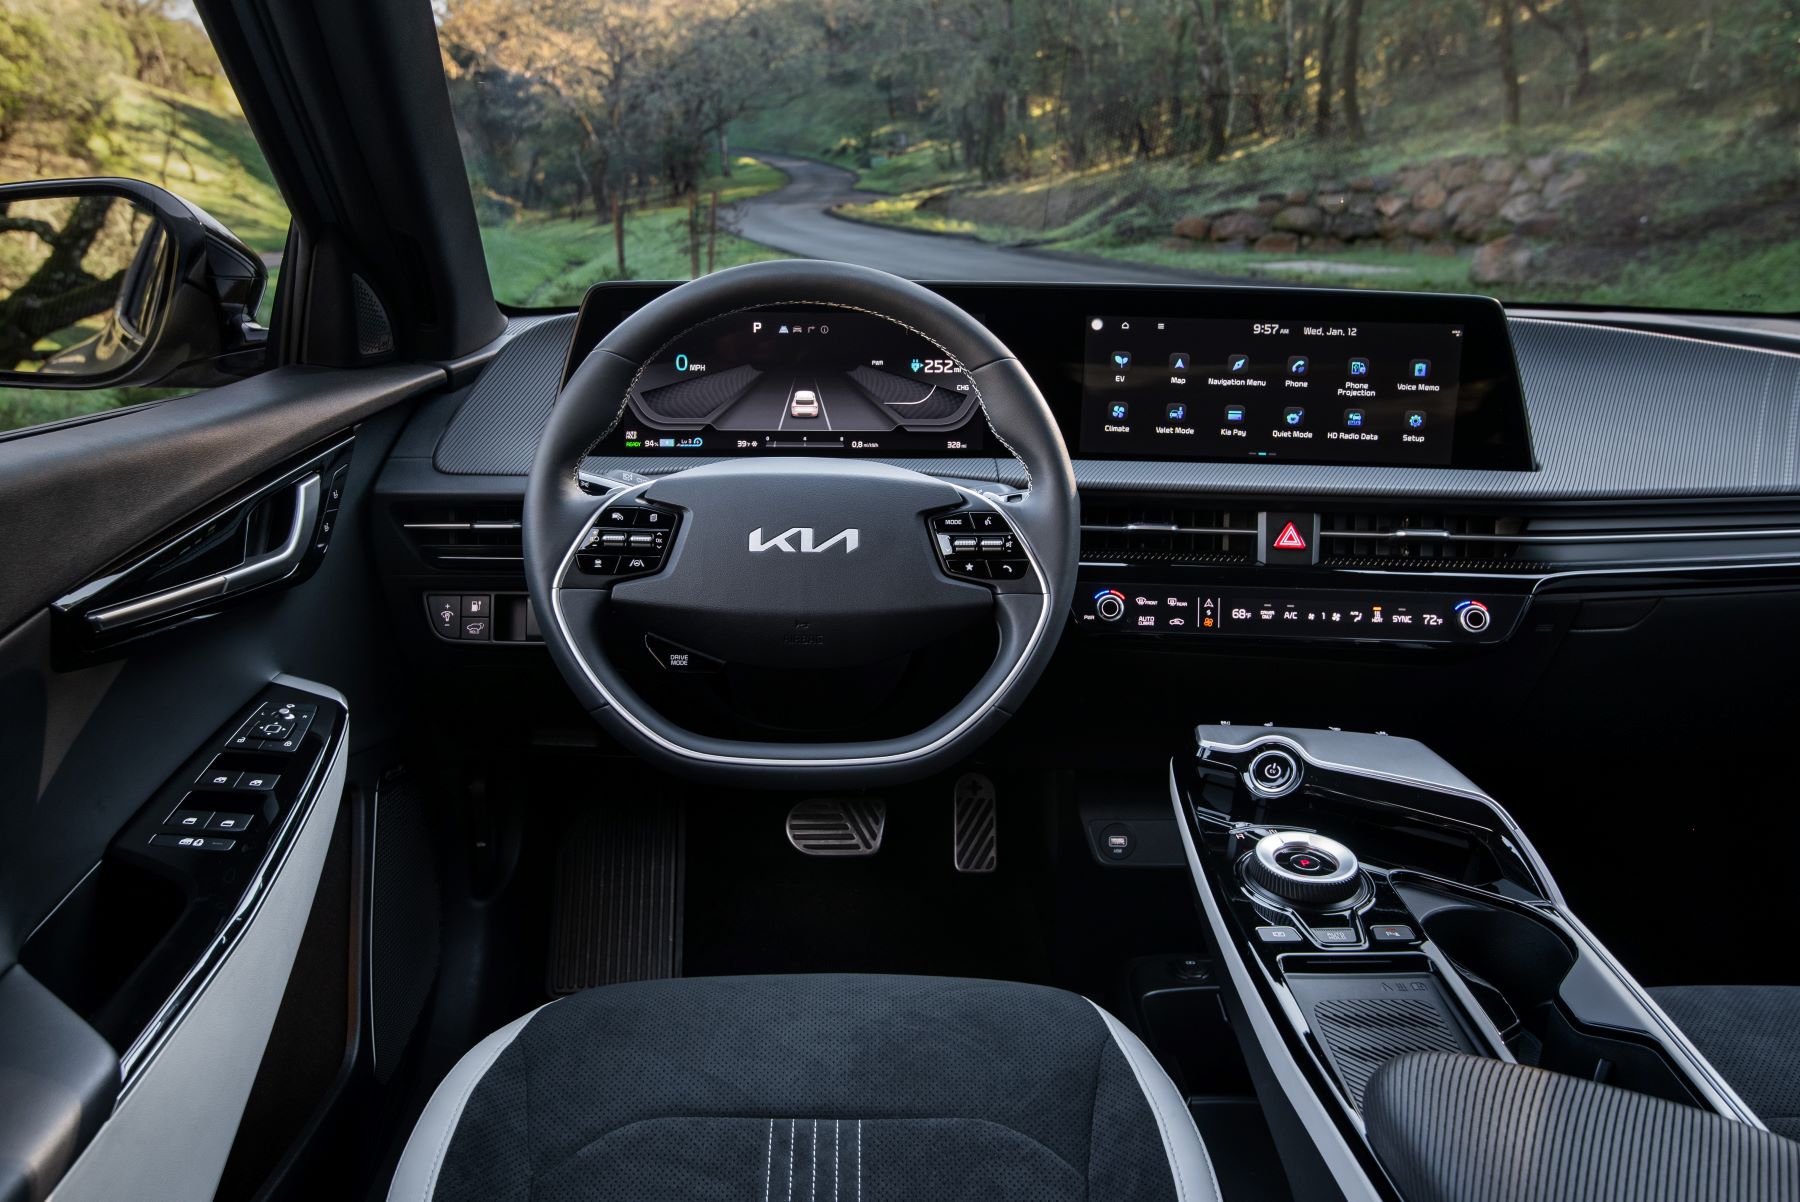 A shot of the interior of the 2022 Kia EV6 electric SUV featuring the steering wheel and infotainment system display